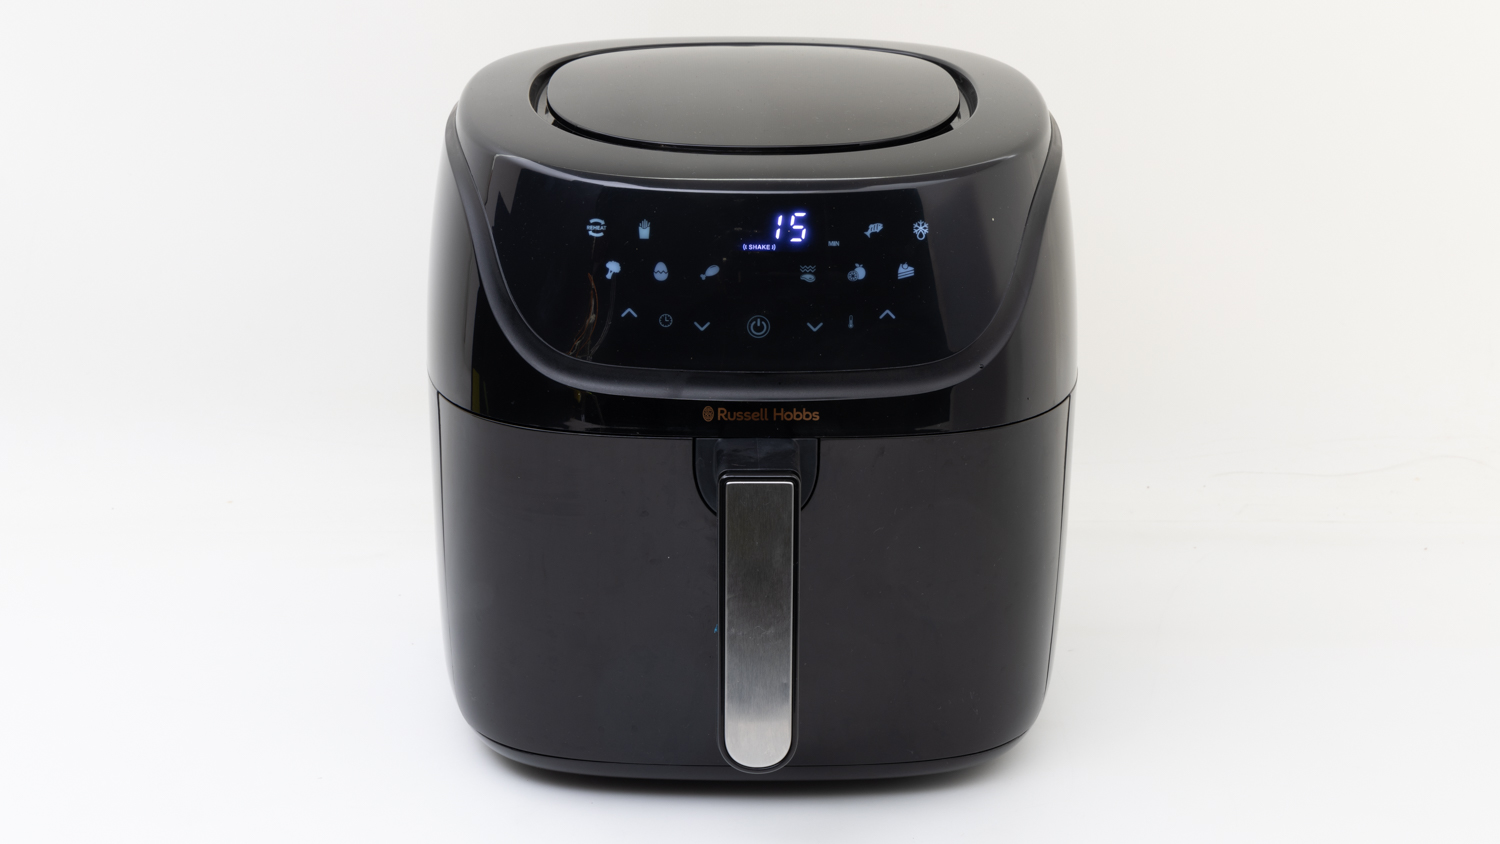 SatisFry Air Extra Large 8L Air Fryer – Black – National Product Review